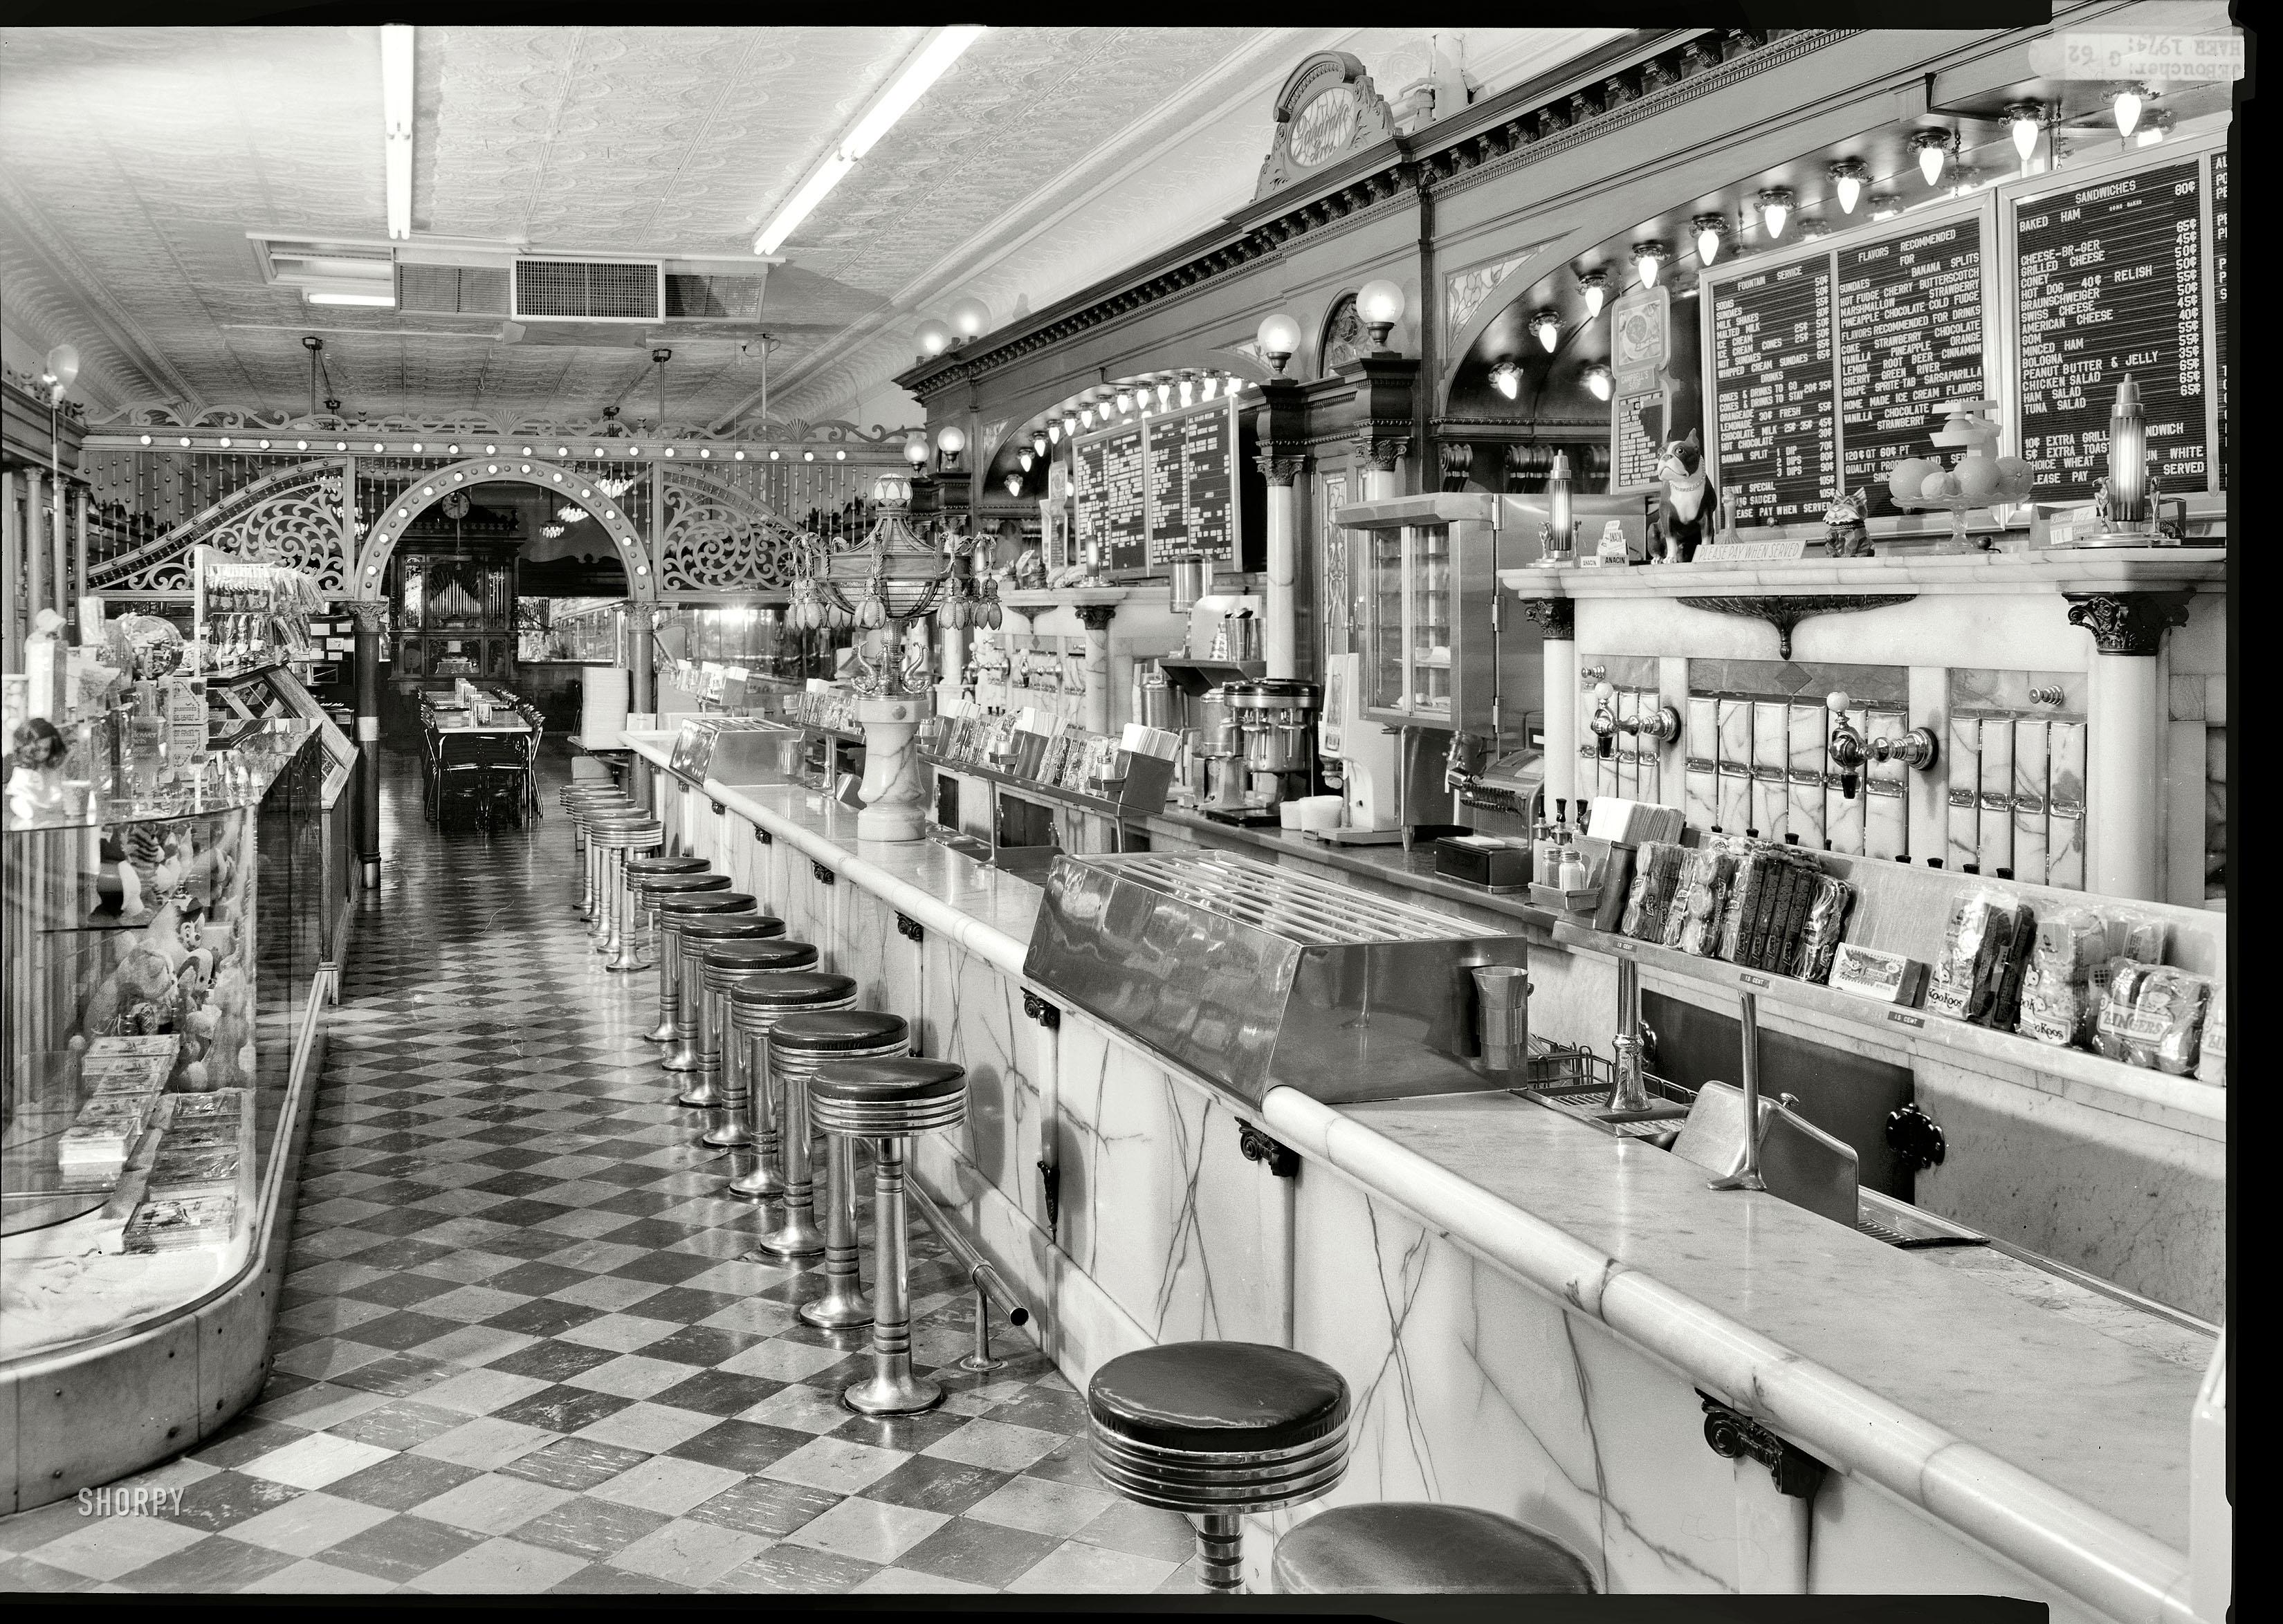 April 1974. Columbus, Indiana. "General view of soda fountain area -- Zaharako Bros. Ice Cream Parlor, 329 Washington Street. Family-run ice cream and confectionery business operating since 1900. This parlor was a major social center in Columbus for the first 50 years. Known for its elaborate interior and ice cream still made by the Zaharako family. Mexican onyx soda fountains purchased 1905; extra counter added 1949; store front modernized 1959." 5x7 negative by Jack E. Boucher, Historic American Buildings Survey. View full size.